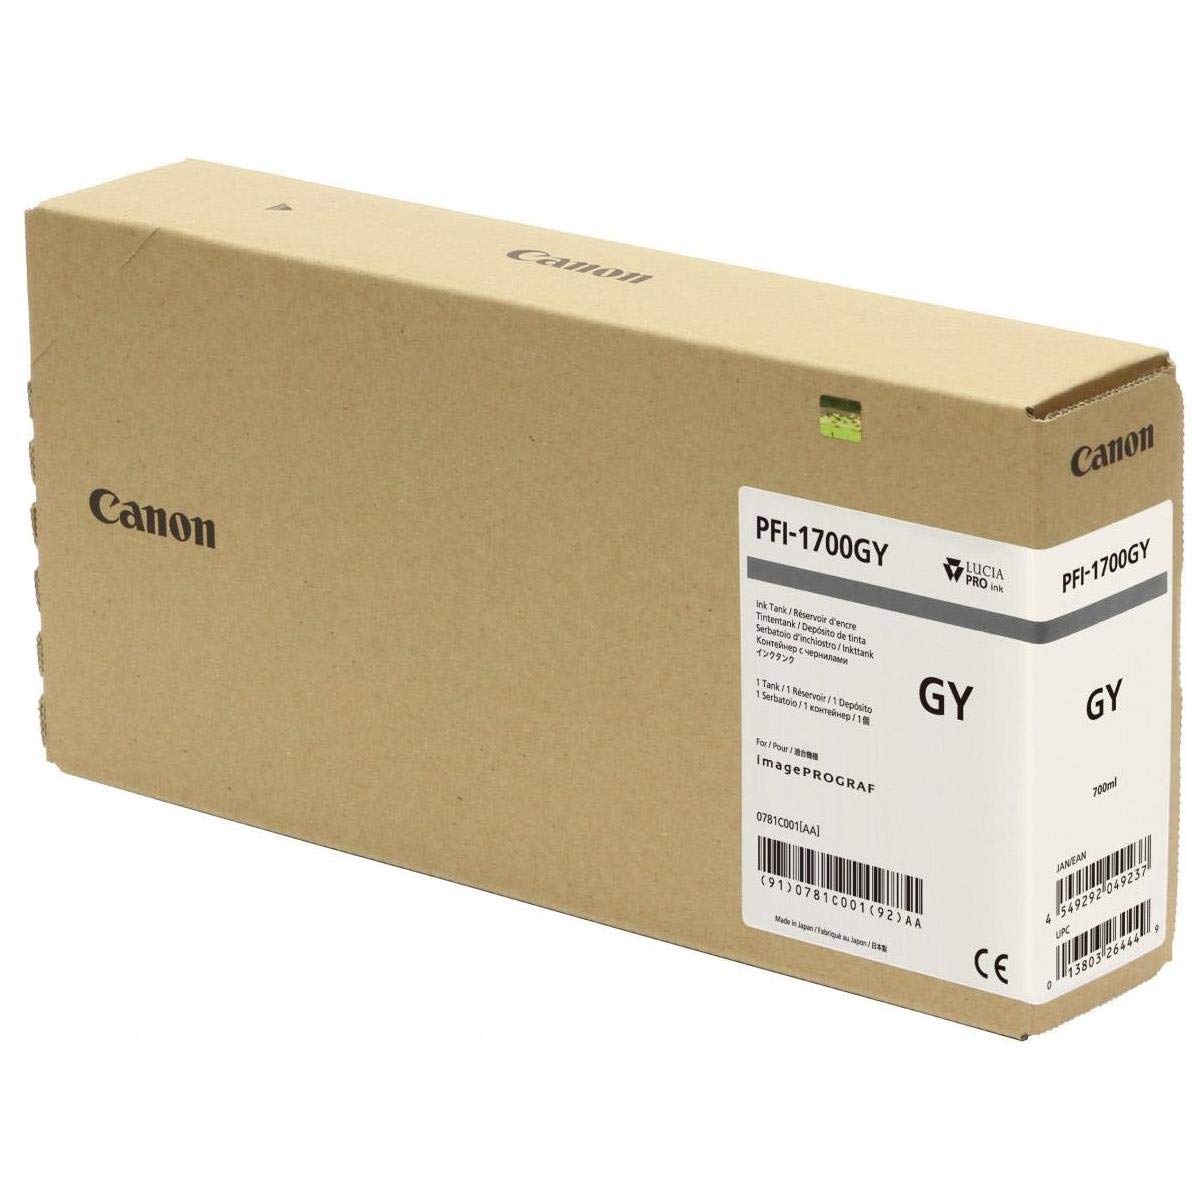 Canon PFI-1700 700ml Gray Pigment Ink Tank for imagePROGRAF PRO-2000, PRO-4000, PRO-4000S and PRO-6000S Large-Format Inkjet Printers